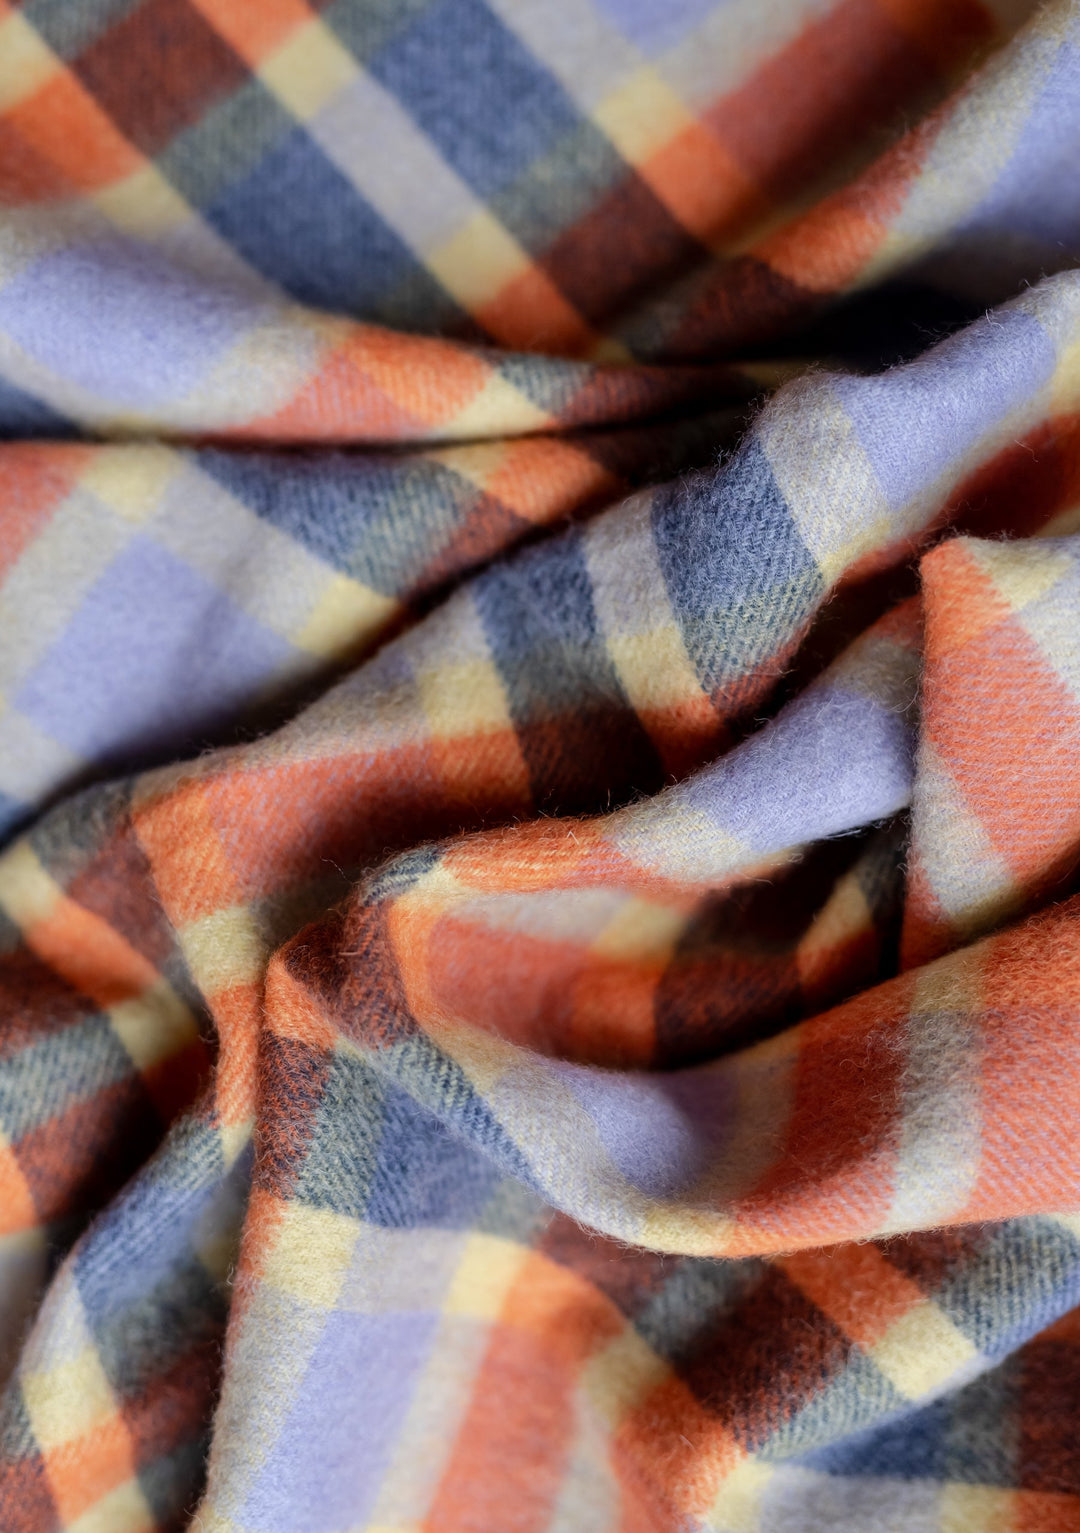 Lambswool Oversized Scarf in Lilac Multi Check